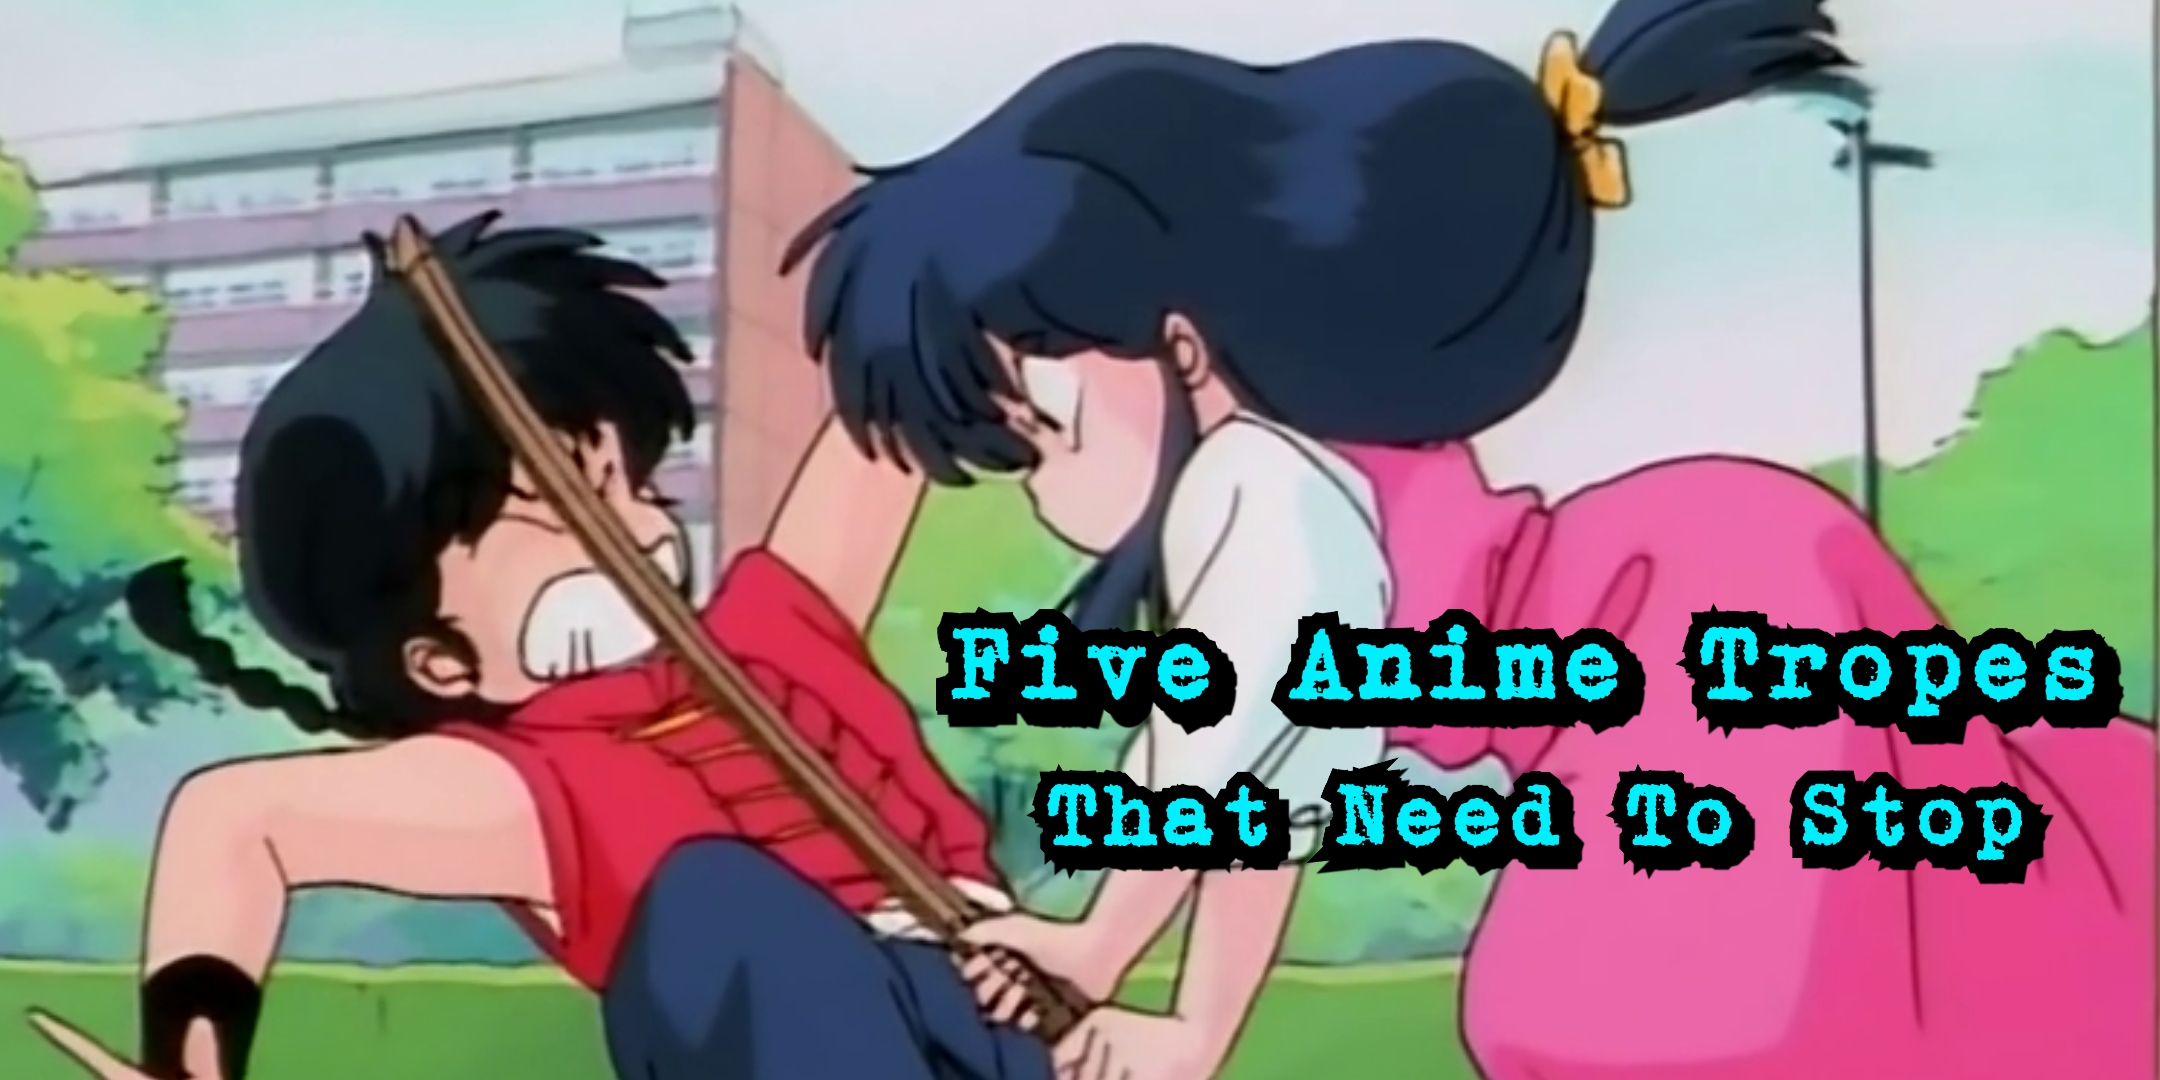 9 Anime Tropes That Are Always Hit or Miss